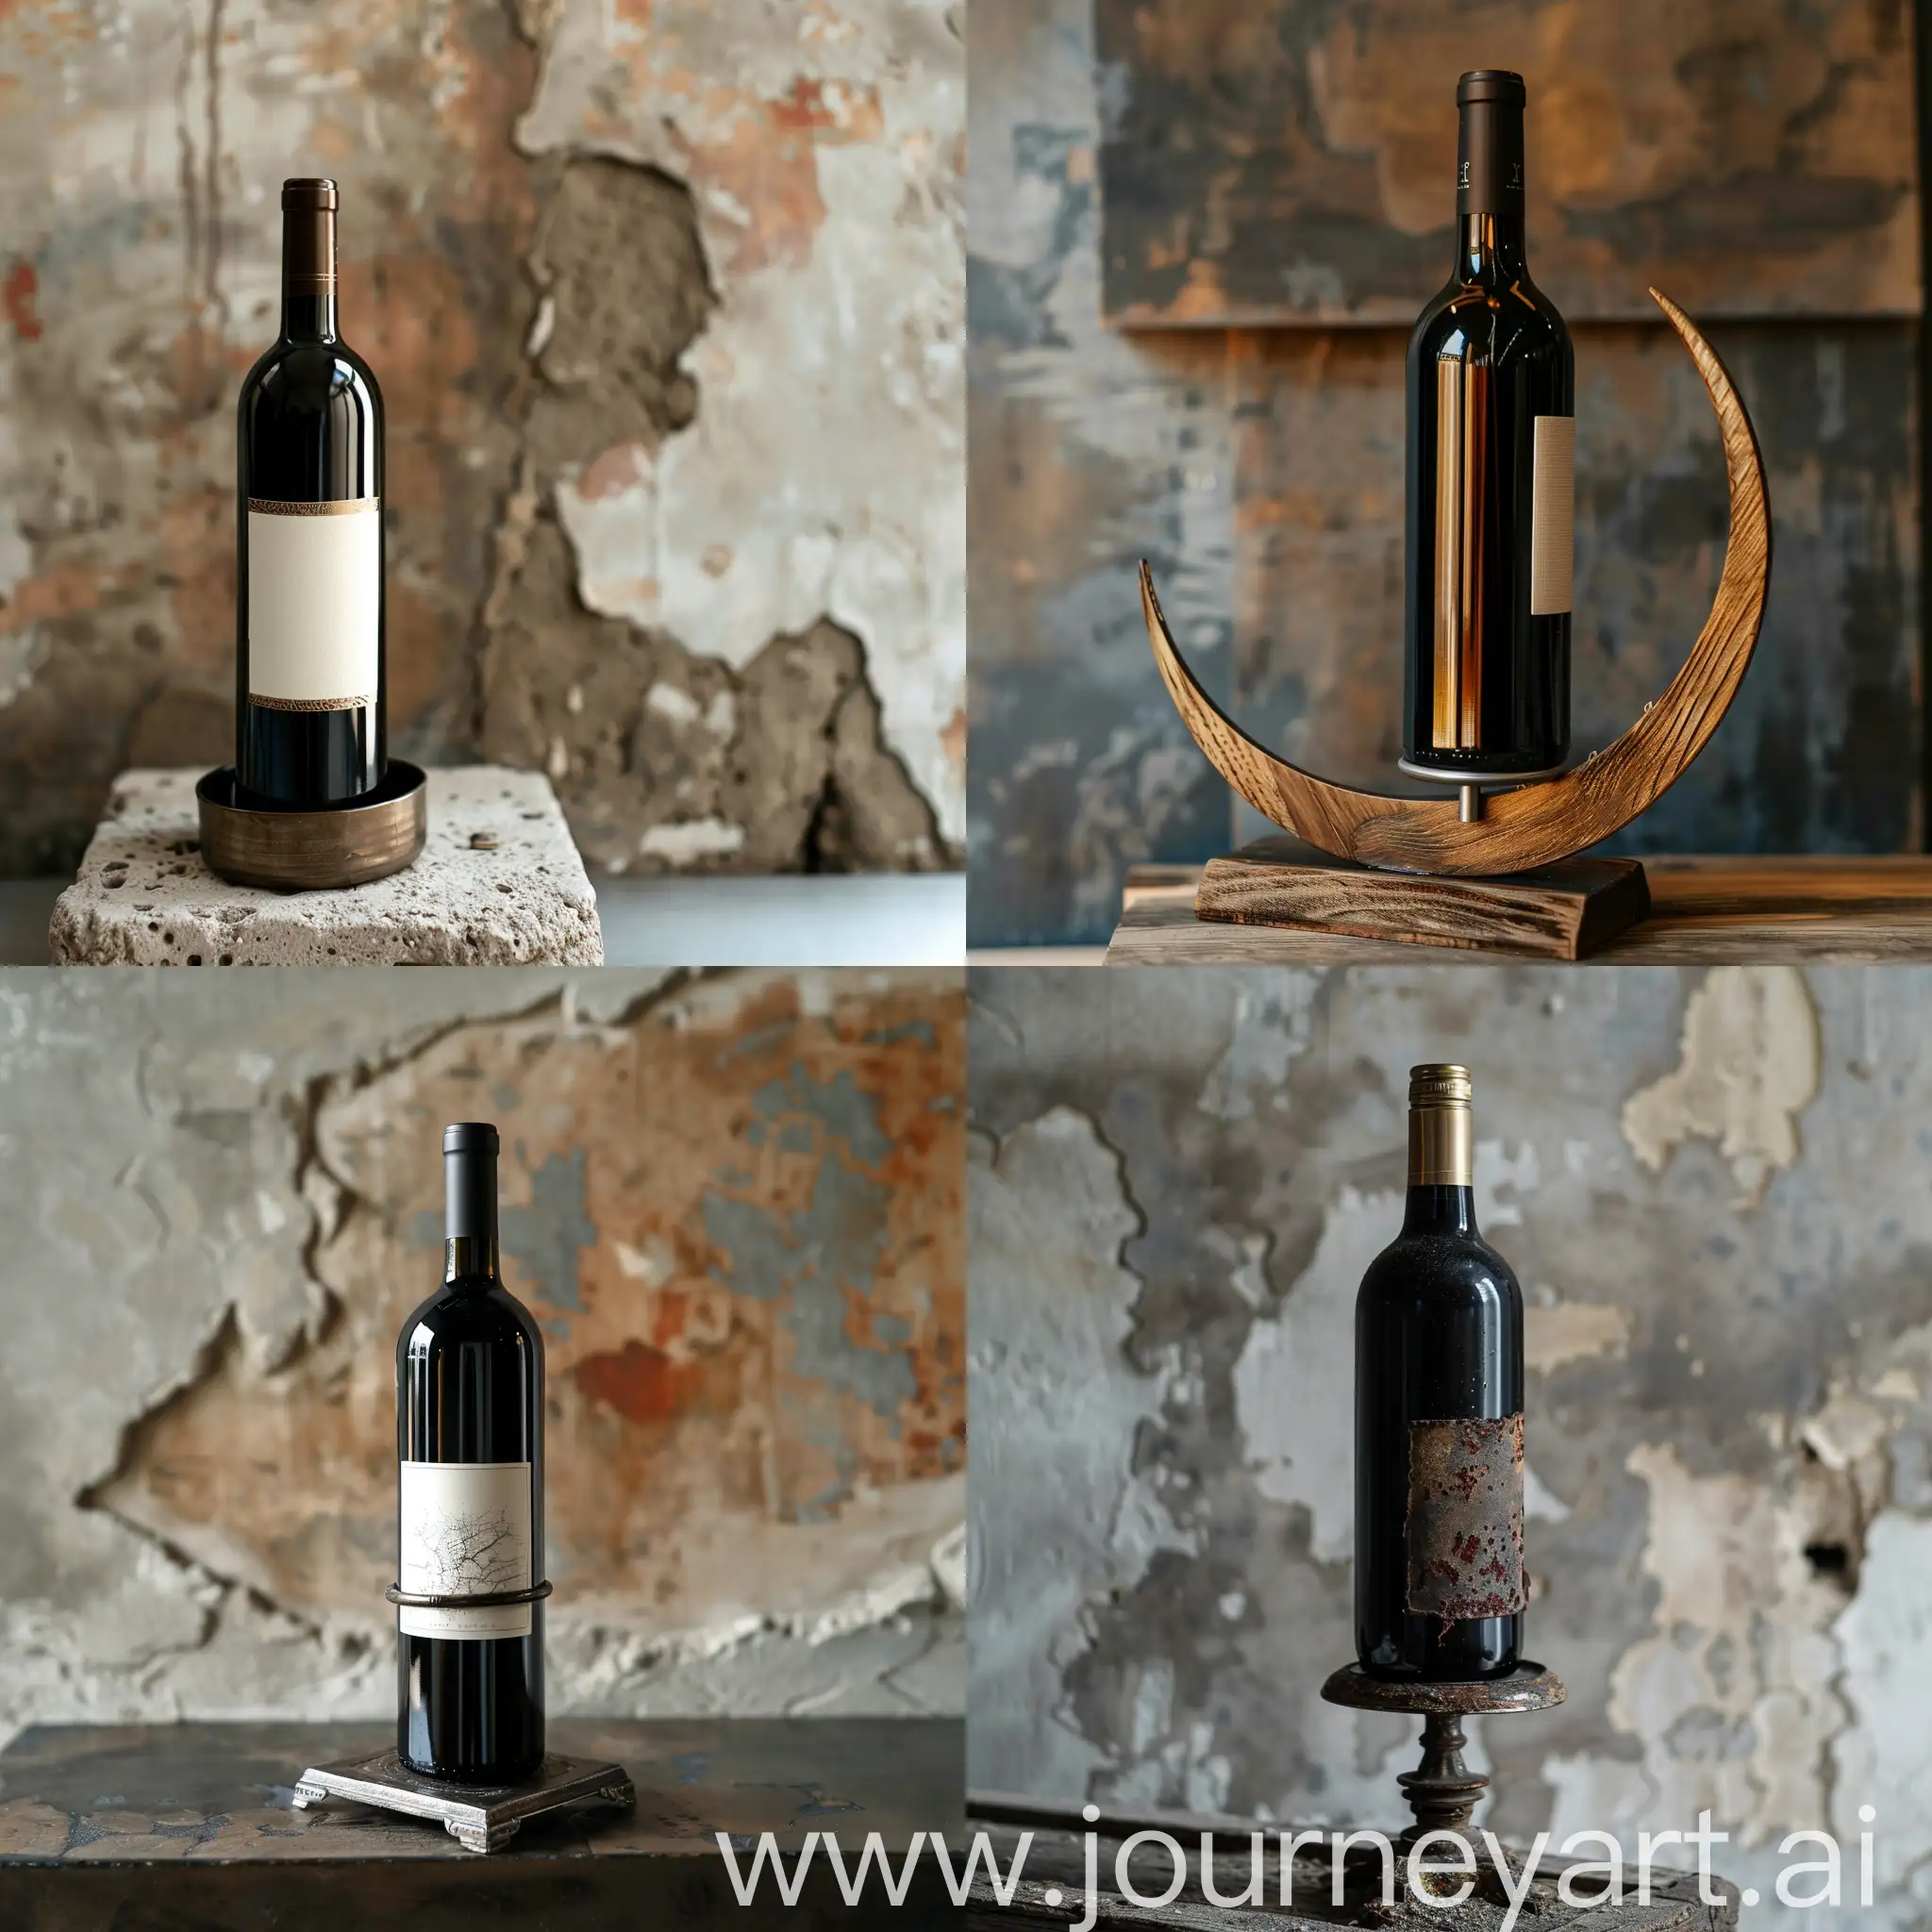 A bottle of wine is kept on a stand and there is a wall behind